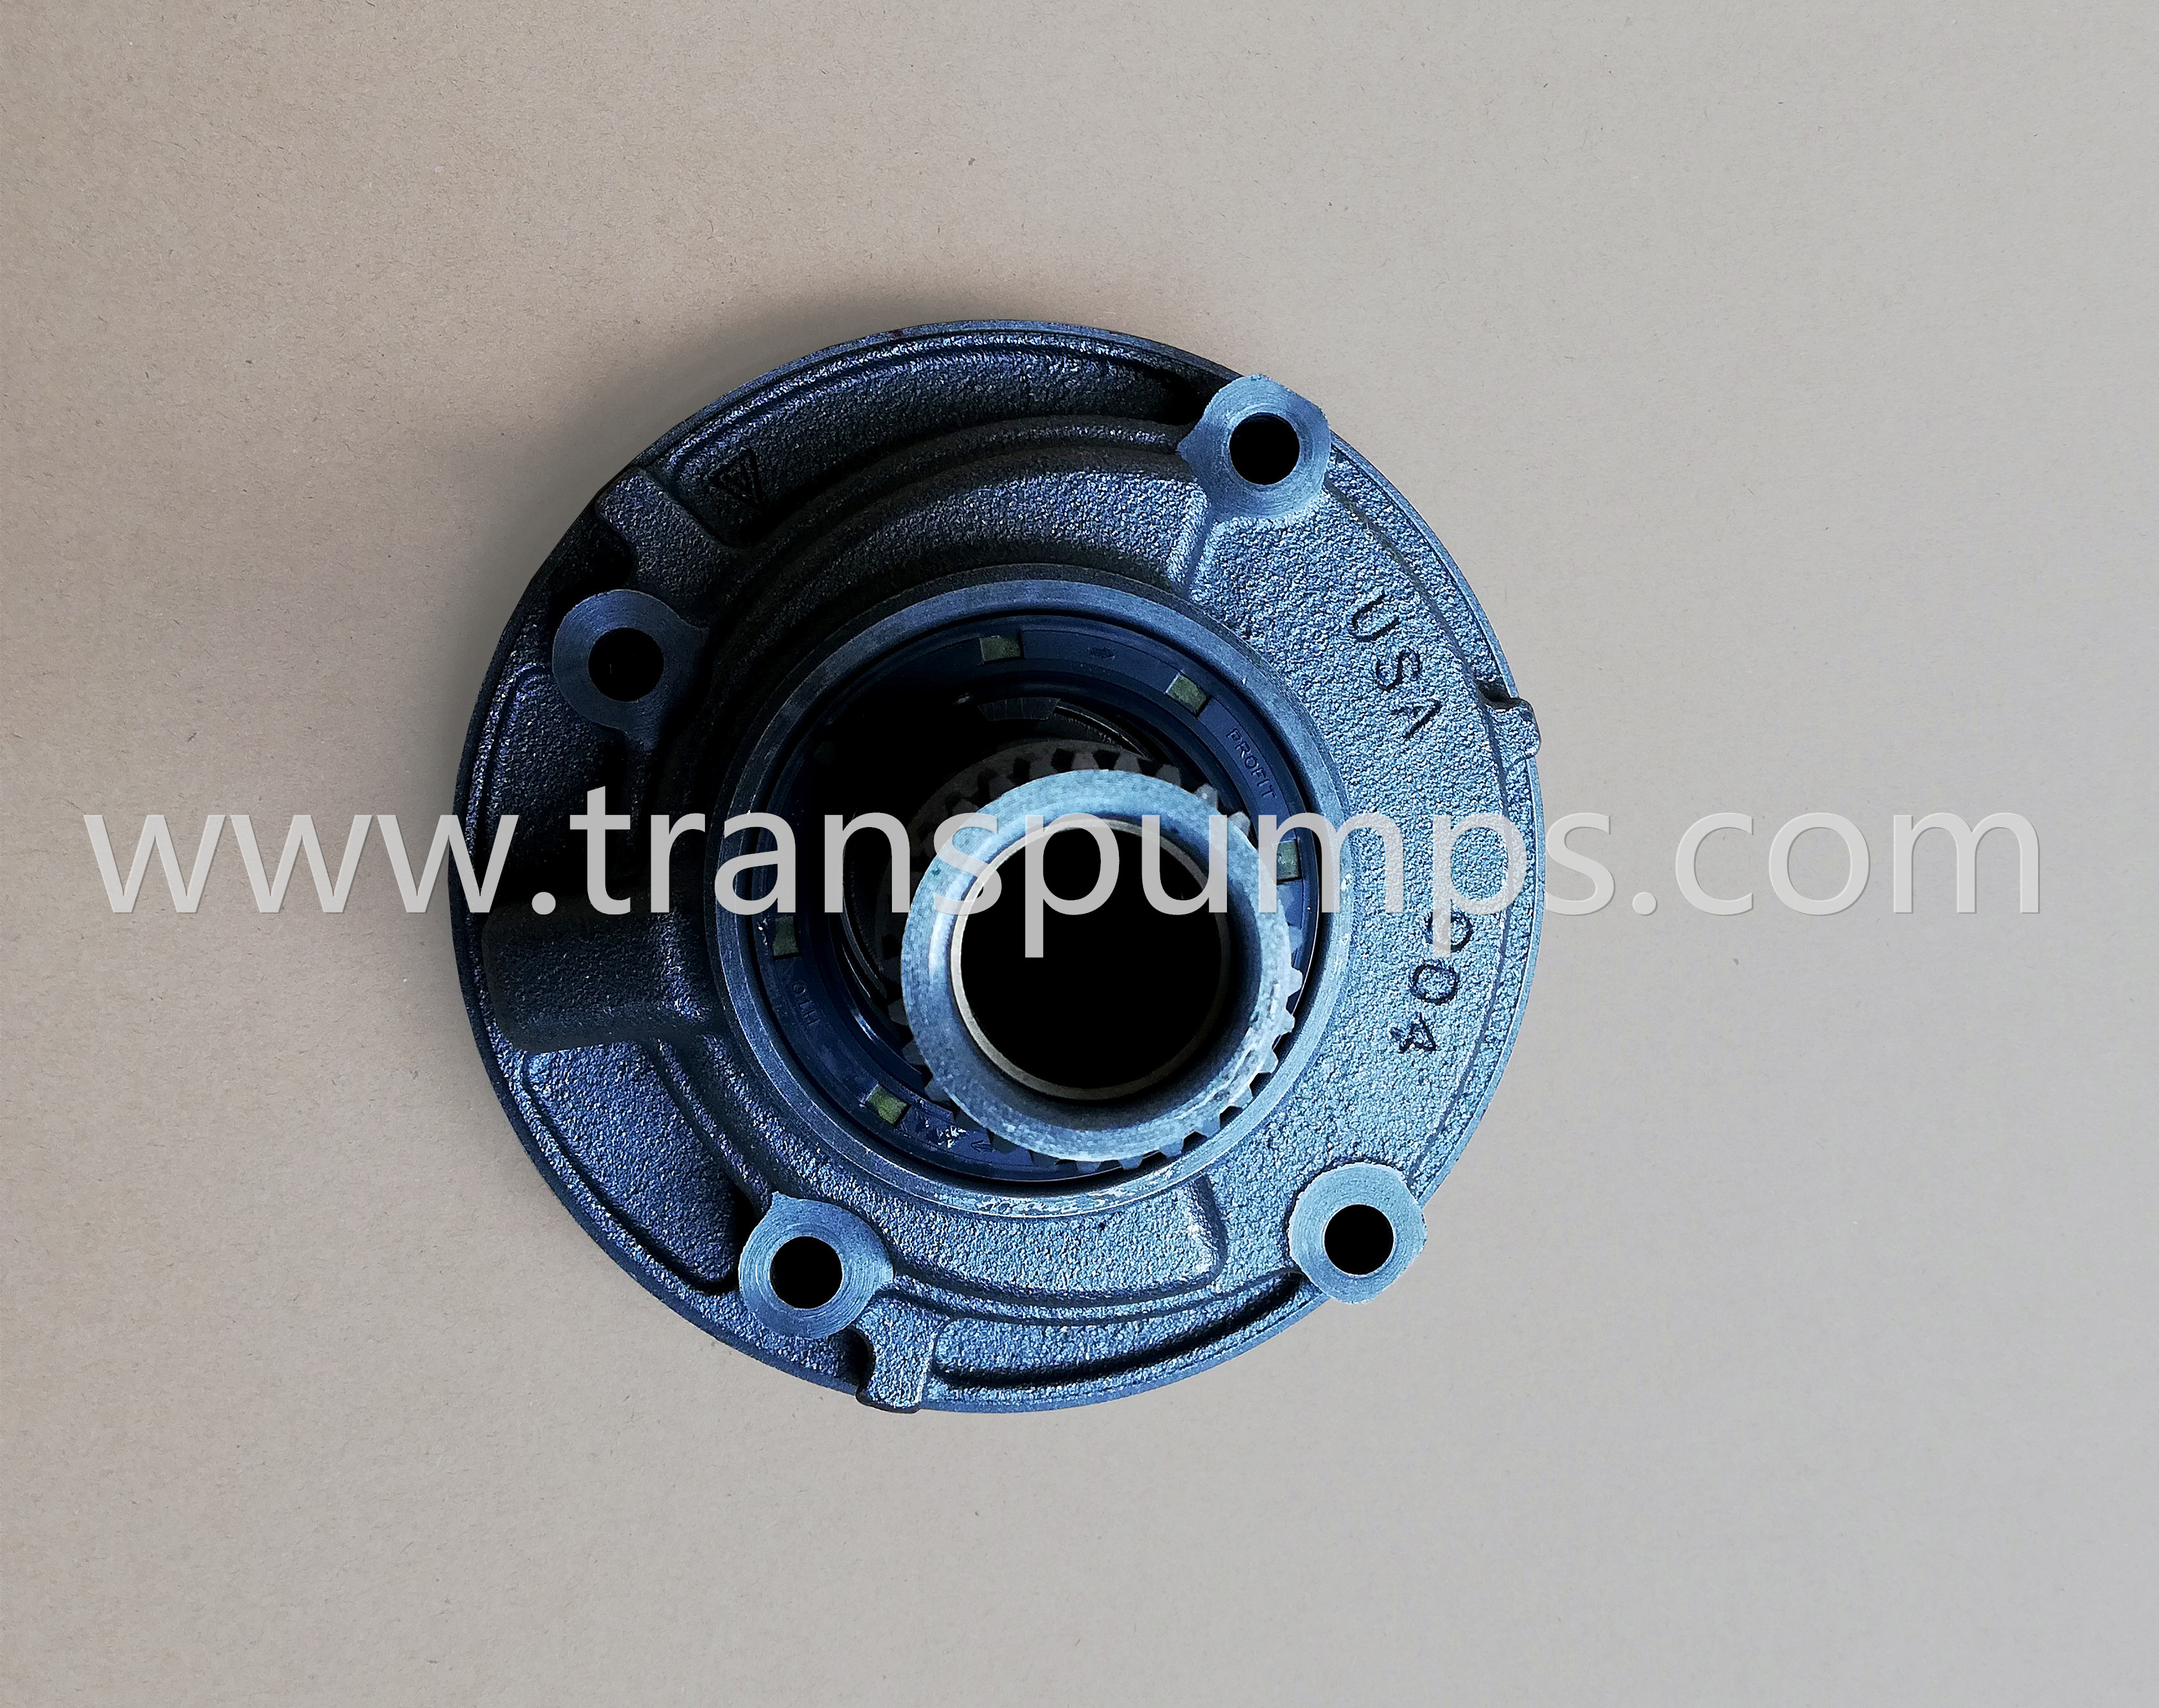 Case torque charge pump, transmission charge pump for CASE machine, transmission pump for case, transmission oil gear pump, New aftermarket transmission charge oil pump assembly, transmission pump CASE machines, US OEM transmission pump CASE machines, transmission oil pump assy, transmission pump replacement price, shuttle transmission charge pump, new aftermarket hydraulic pump, case backhoe hydraulic pump, case backhoe fuel pump,case 580 fuel pump, case hydraulic pump,case 580k lift pump, case 580 lift pump, case 580l lift pump,case lift pump, case pump price, case pumps,case pump 580k, case 685 hydraulic pump, case 580k transmission pump, case 580k transmission pump, case 580l transmission pump,case 580d transmission pump, case 580 super k transmission pump, case 580 super transmission pump.Backhoe pump, backhoe main pump,backhoe fuel pump, backhoe charge pump，pumpa hidraulike，CASE transmission charging pump for backhoe loader, part no: 137093A1